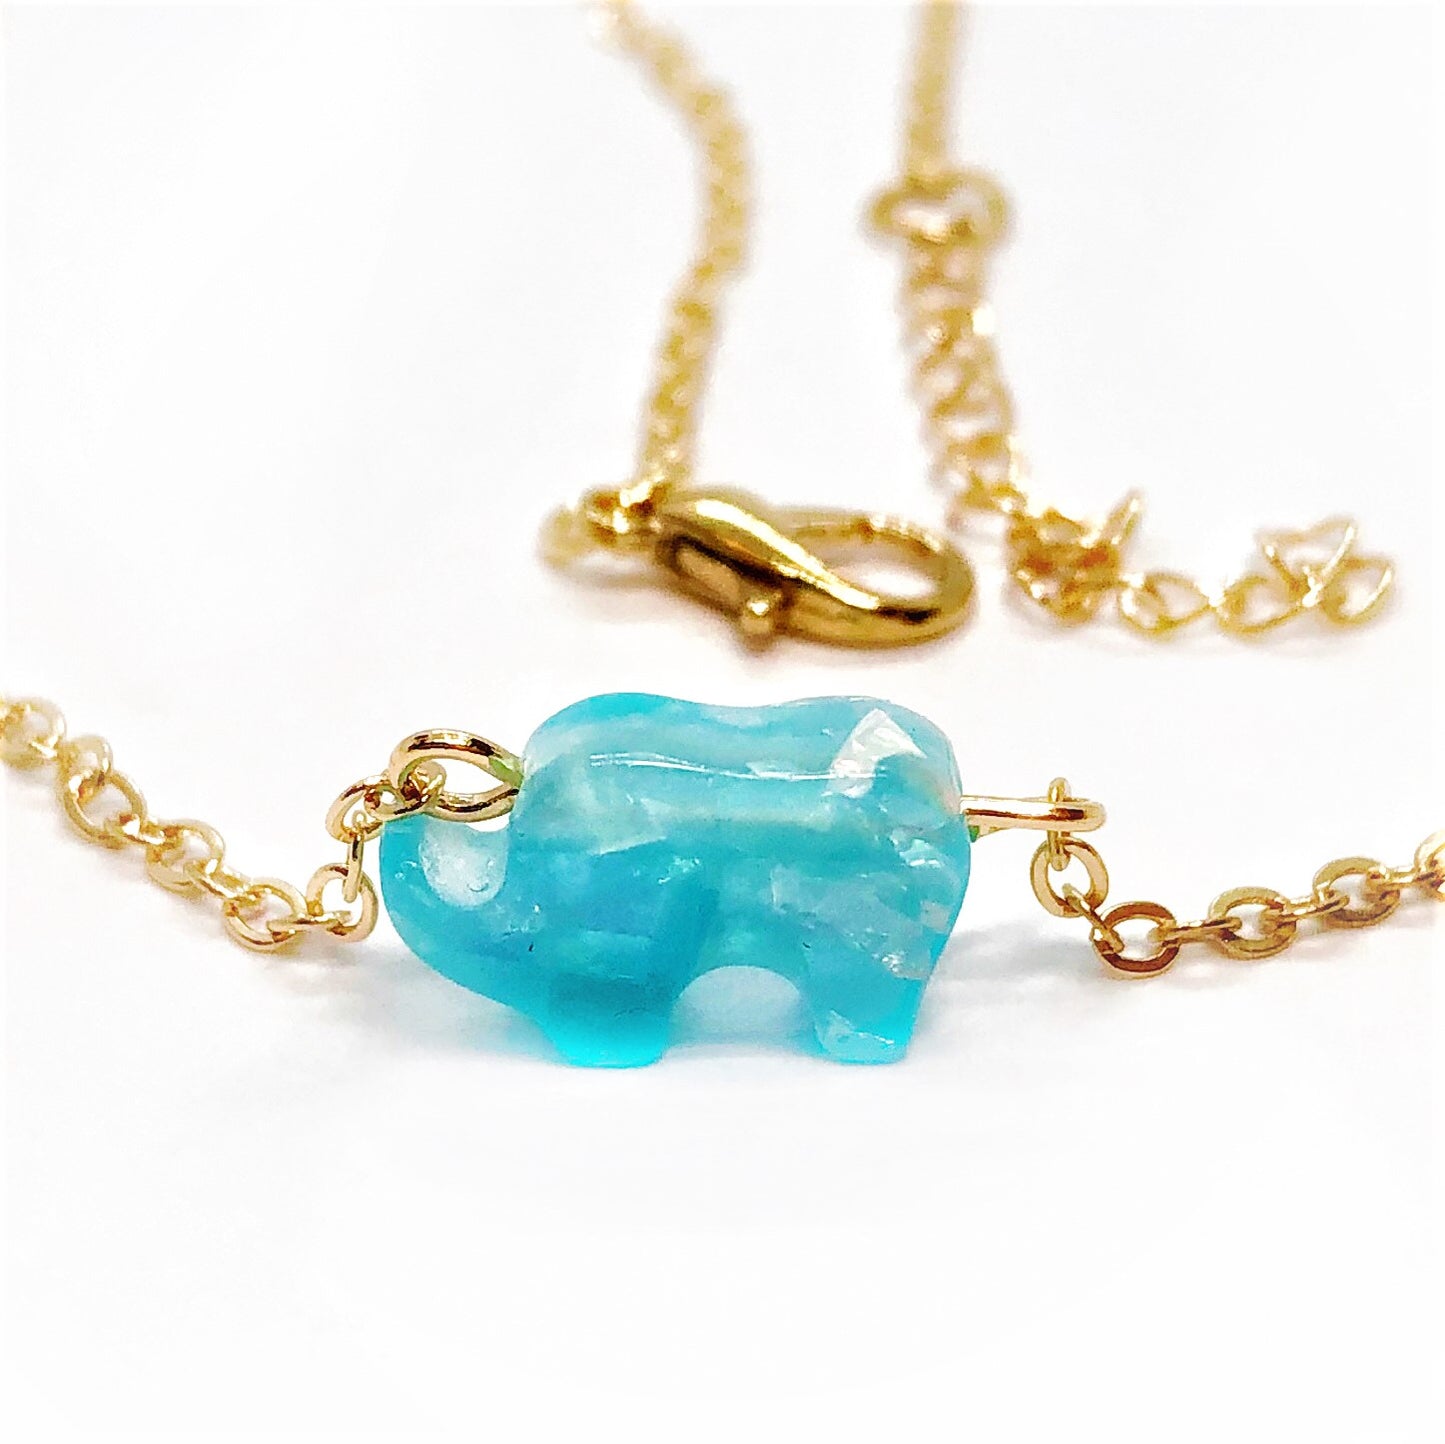 Dainty Chic Elephant Shape Aqua Necklace Special Occasion & Everyday Wear for Women